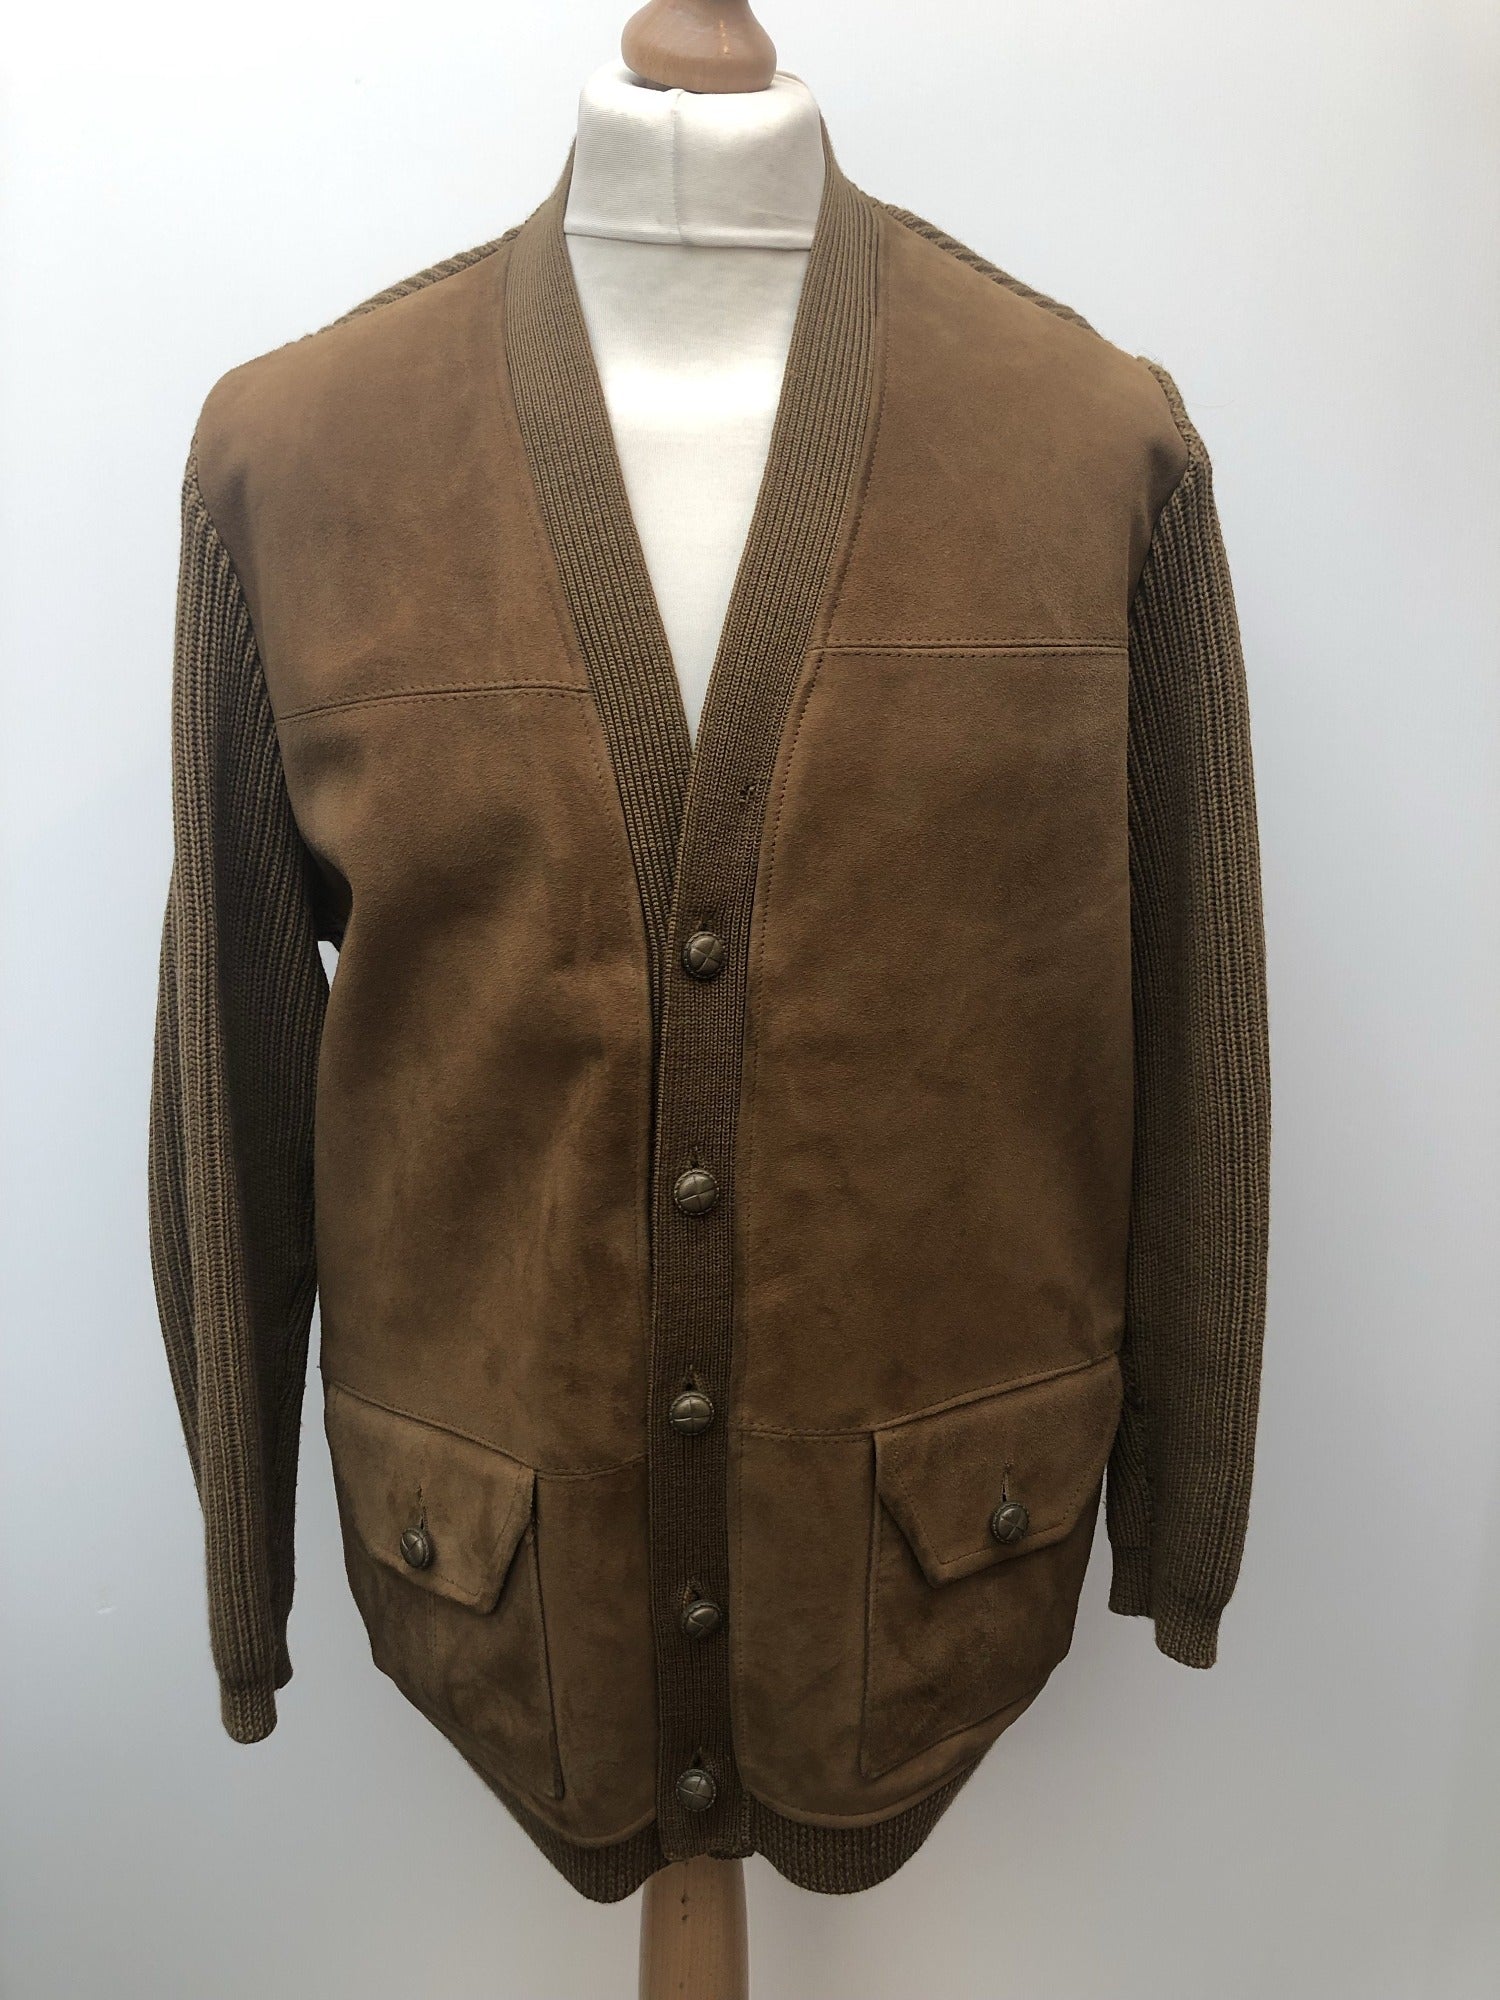 1970s Knit and Suede Cardigan by Glenhusky of Scotland - Size L - Urban ...